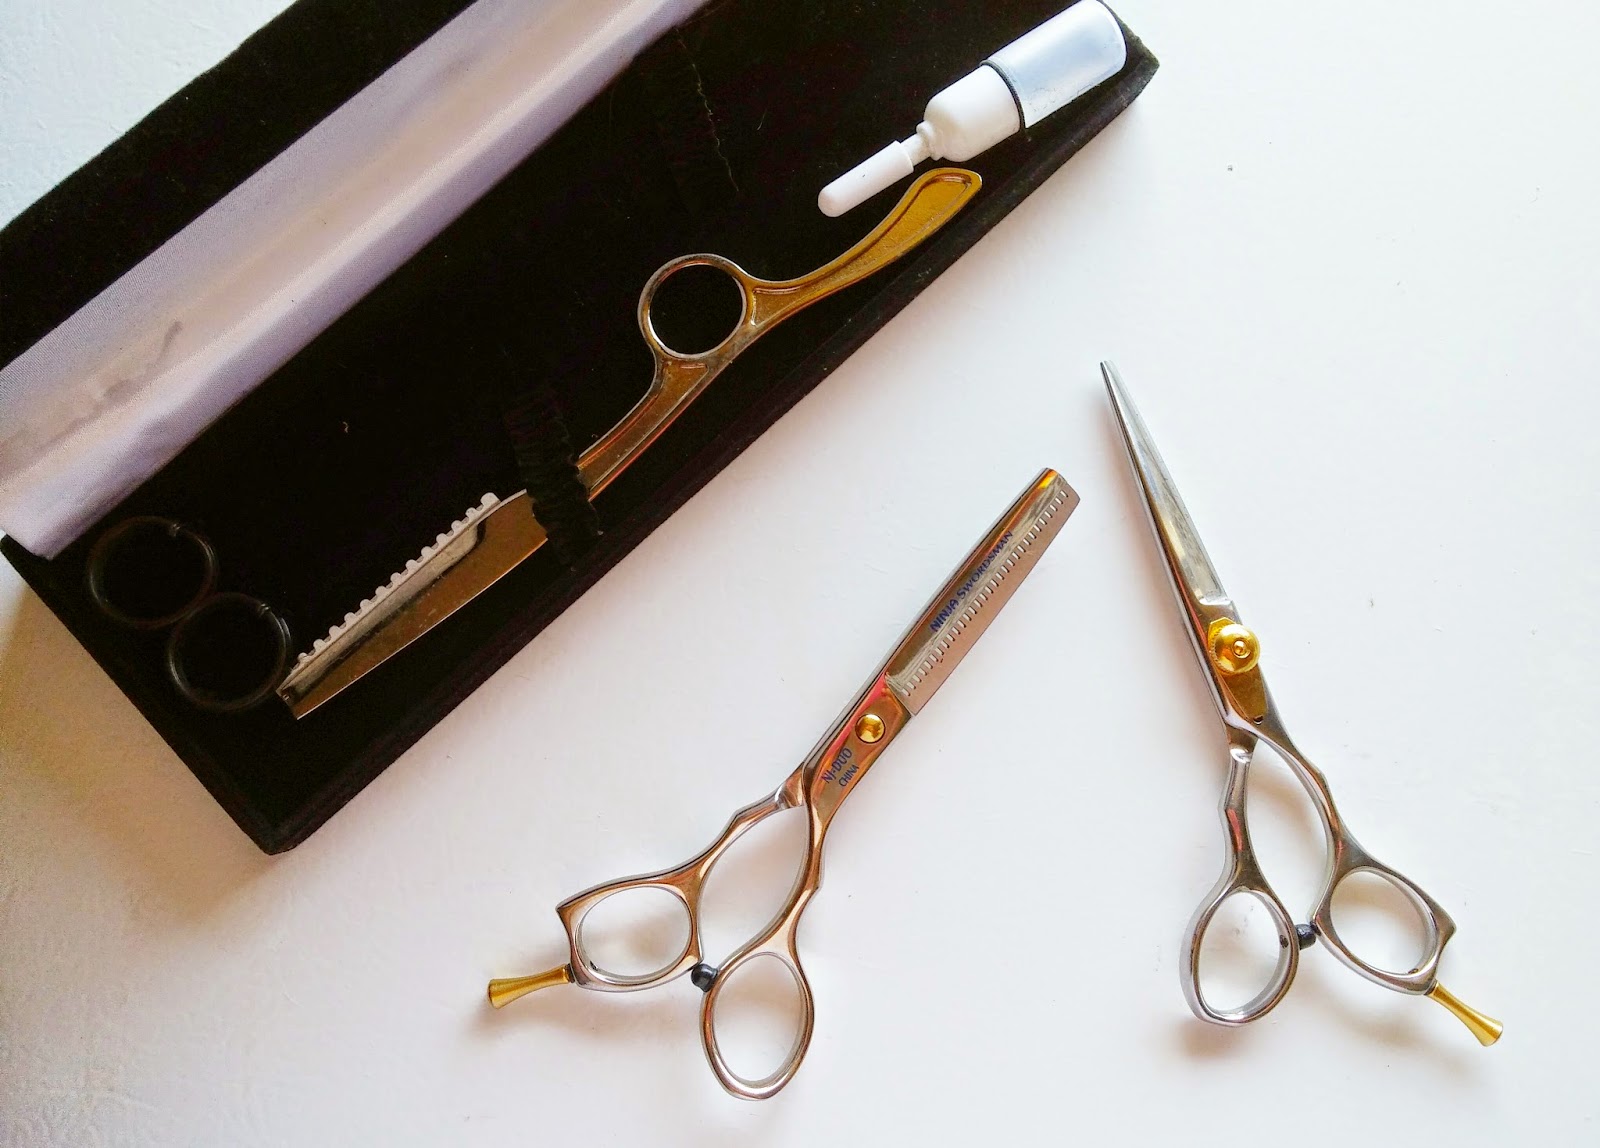 how to hold and use cutting shears